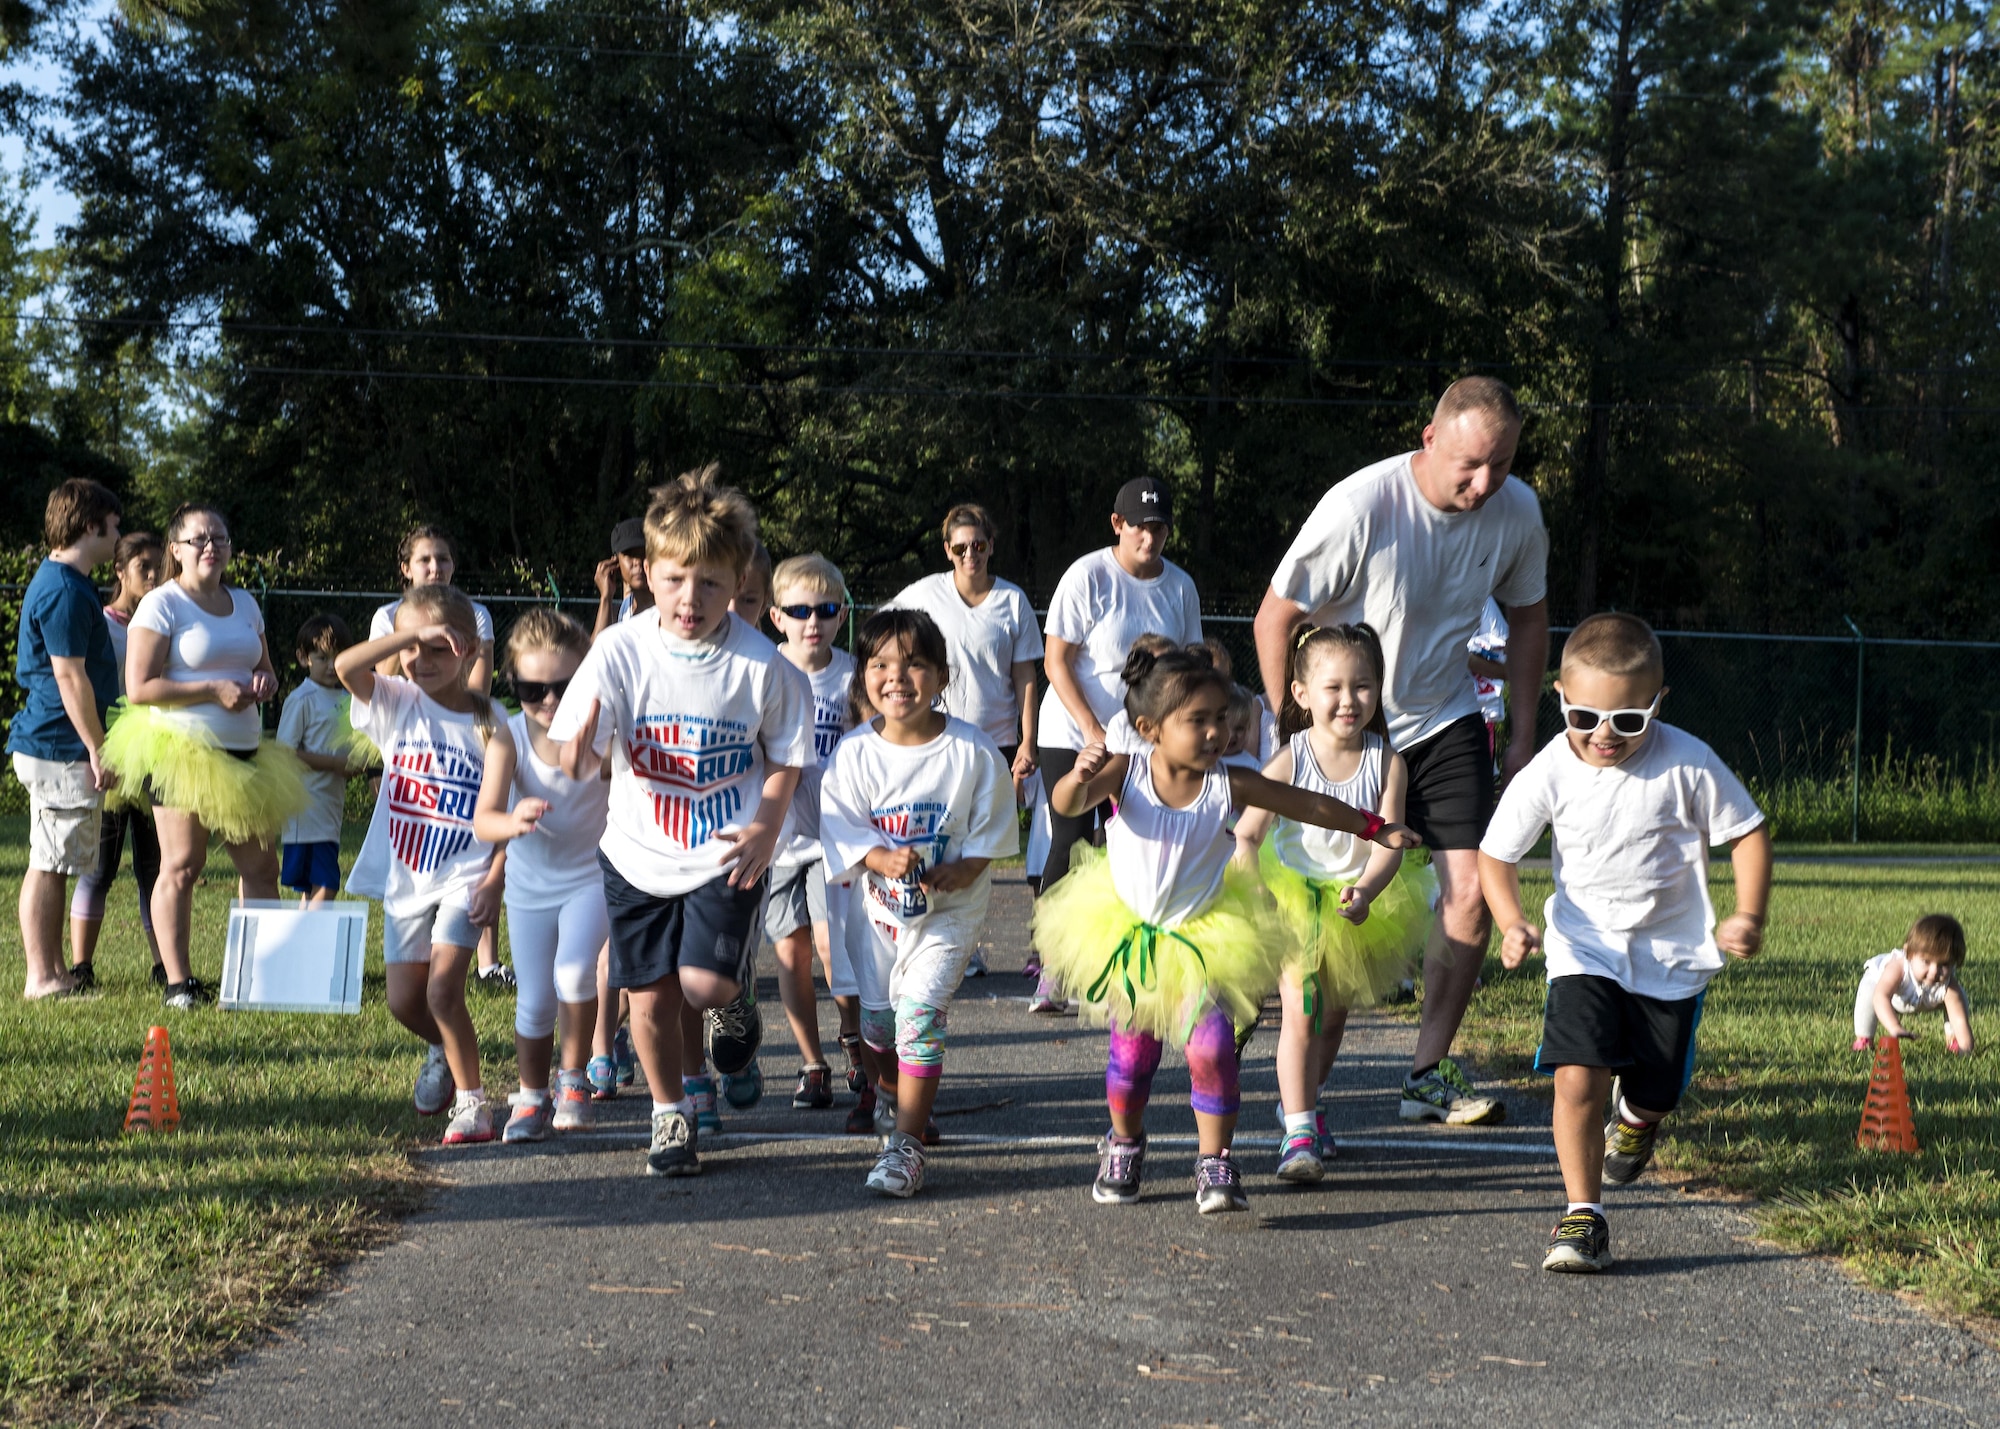 The first wave of children start the half-mile portion of the Kid’s Color Run, Sept. 10, 2016, at Moody Air Force Base, Ga. Children ages five to six competed in the .5 mile race, while ages seven to eight ran one mile, ages 9 to 13 ran two miles and 14 and older ran a 5k. (U.S. Air Force photo by Airman 1st Class Janiqua P. Robinson)